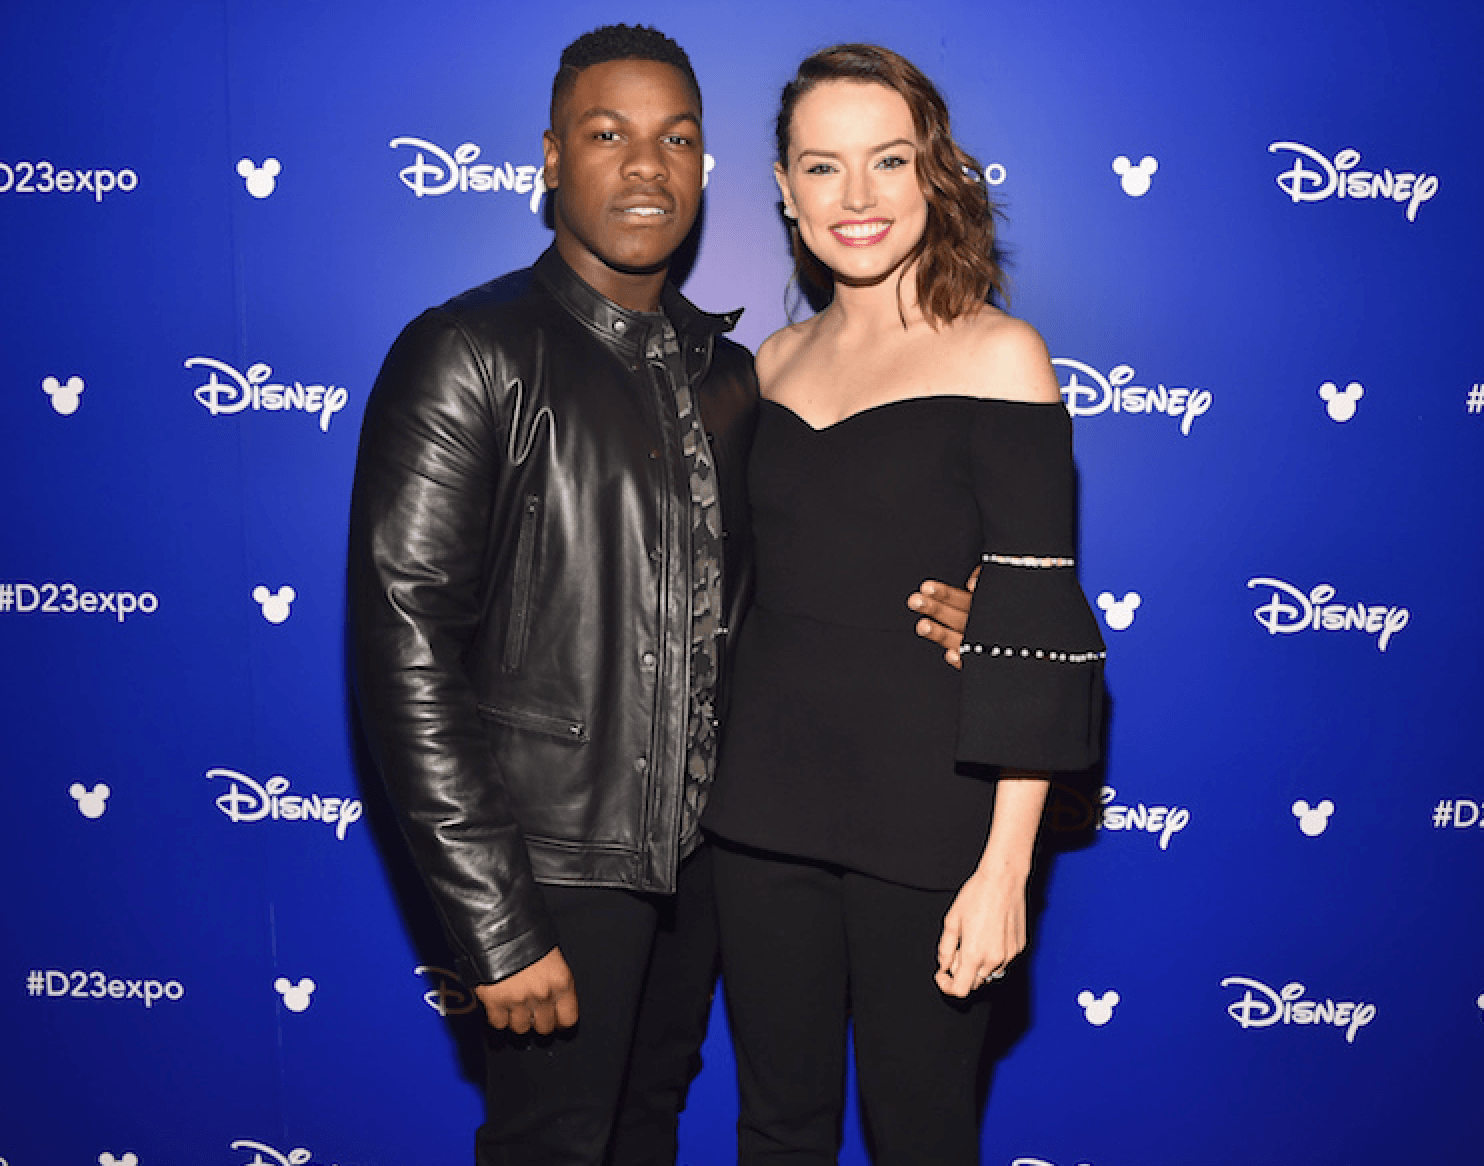 John Boyega poses with Daisy Ridley at the Star Wars Celebration Day event. 